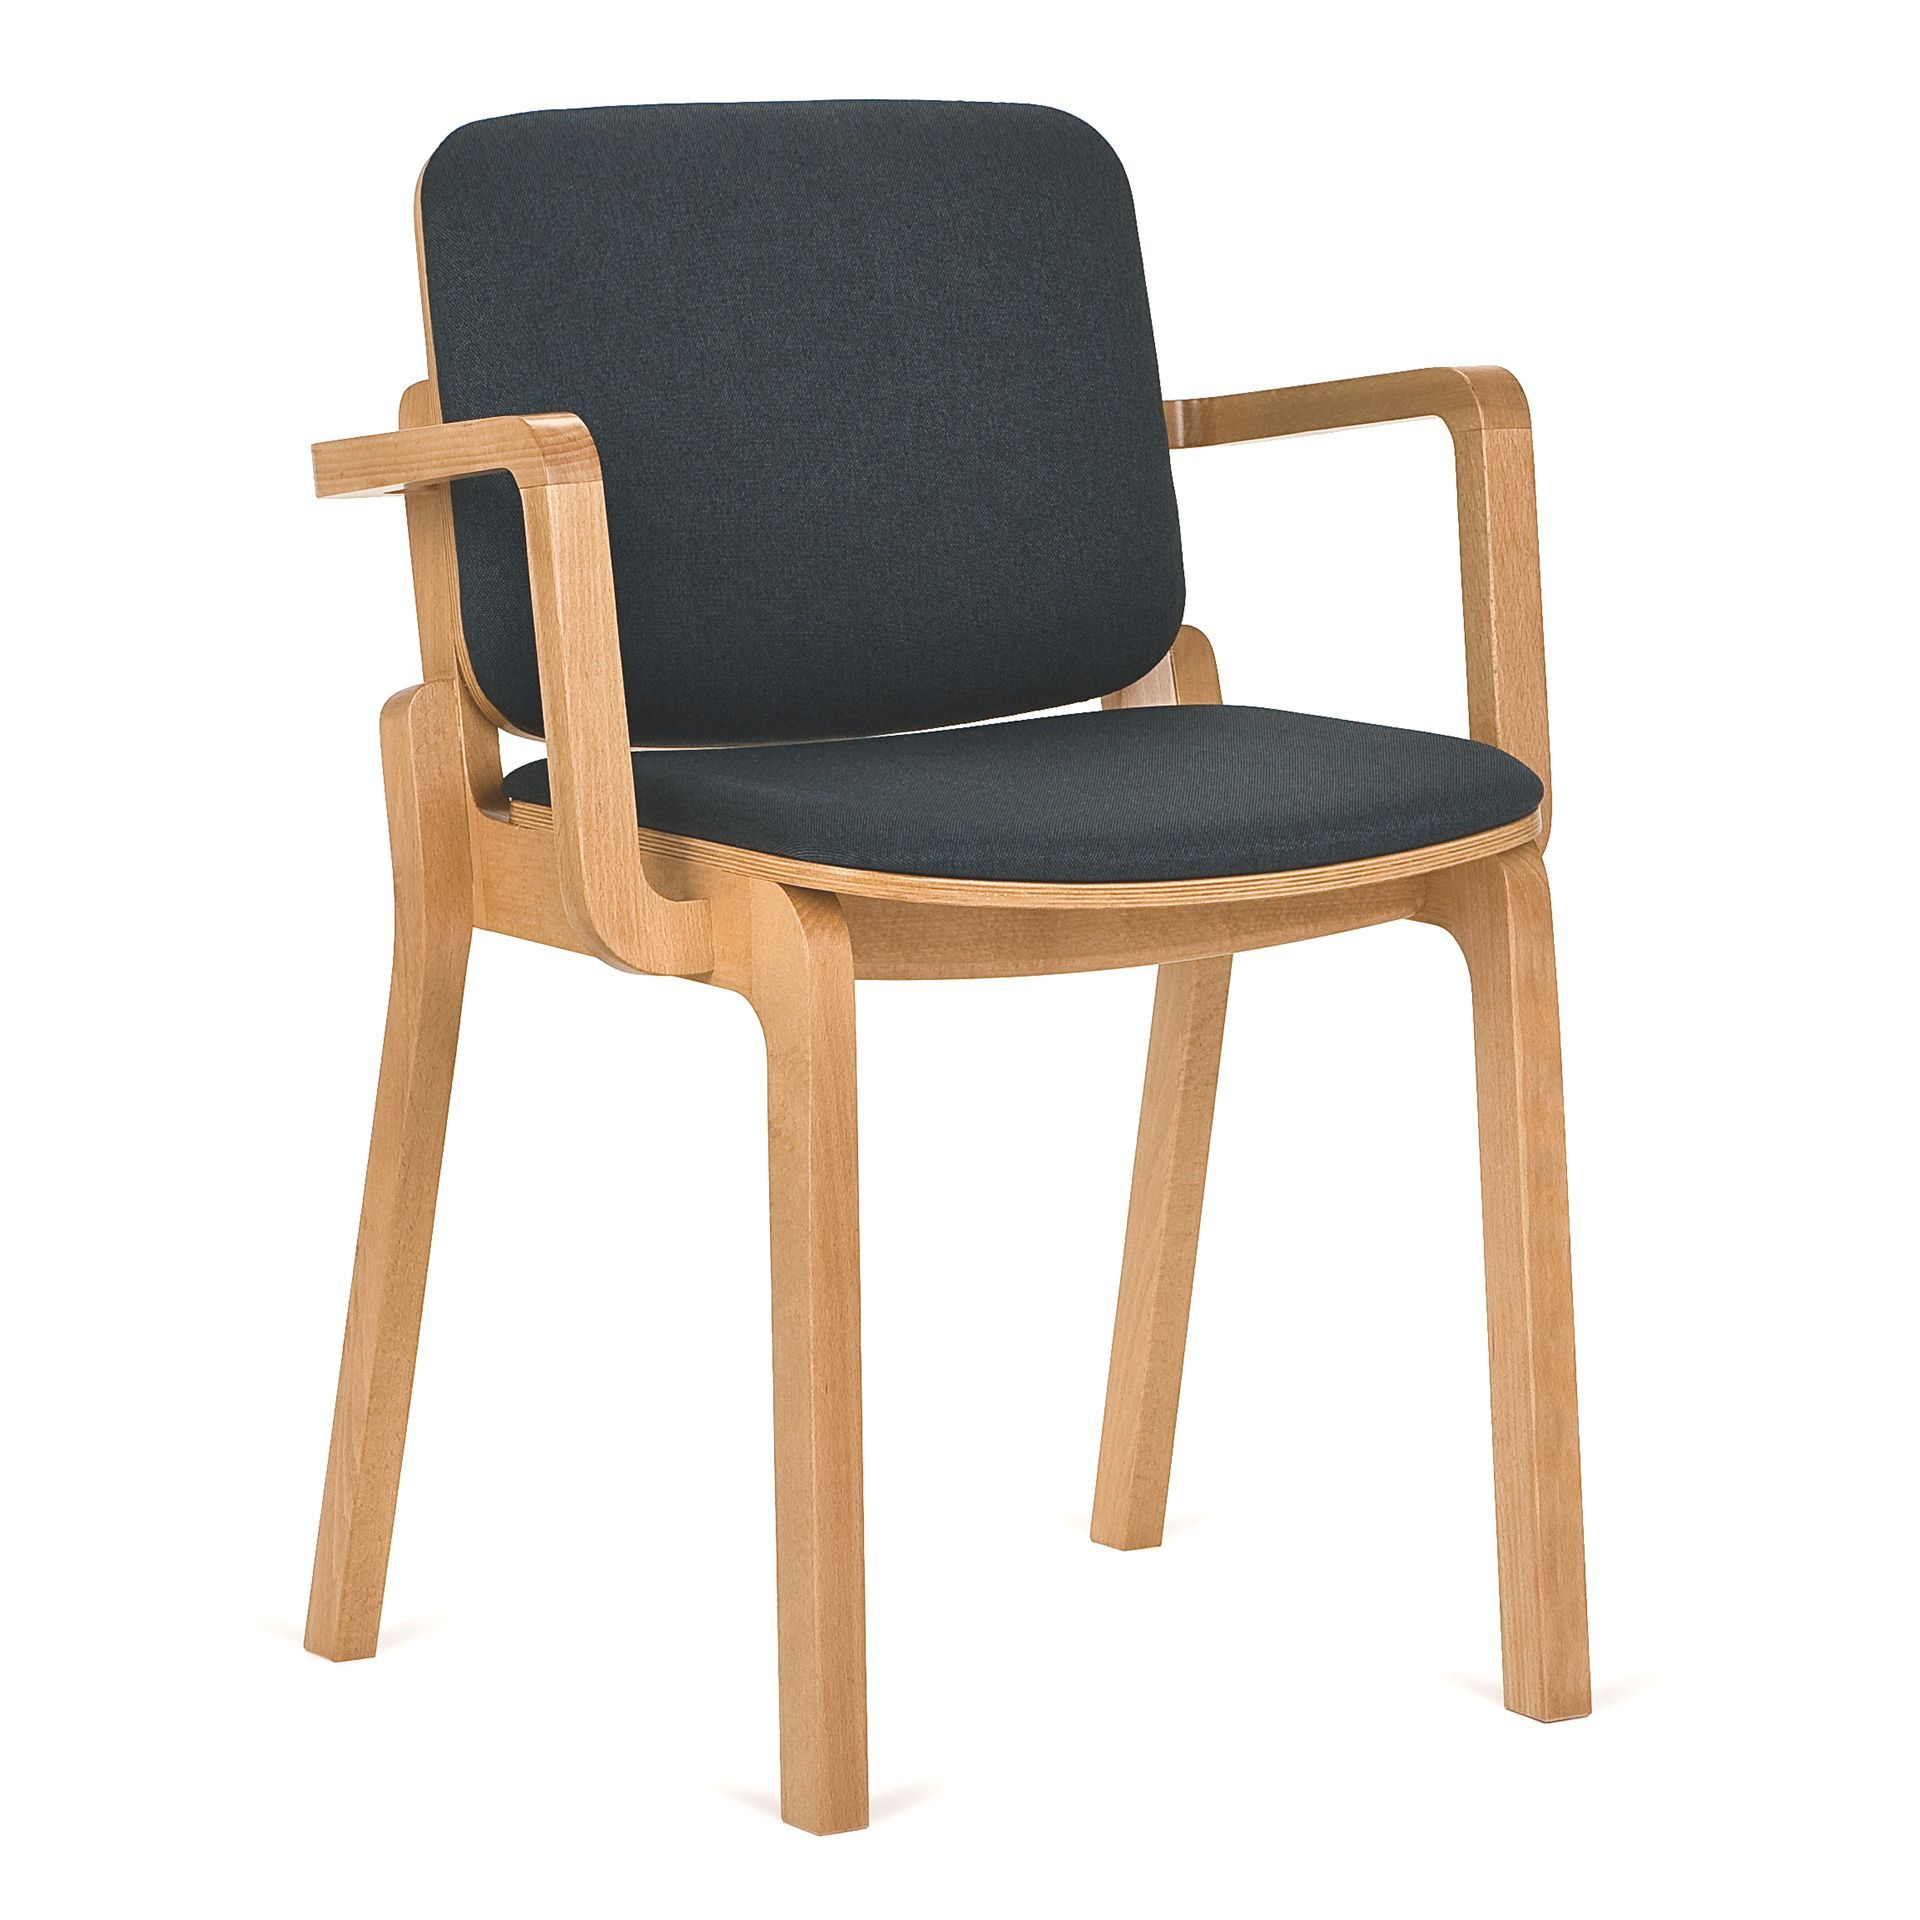 Chair B-3702 HIP by Paged